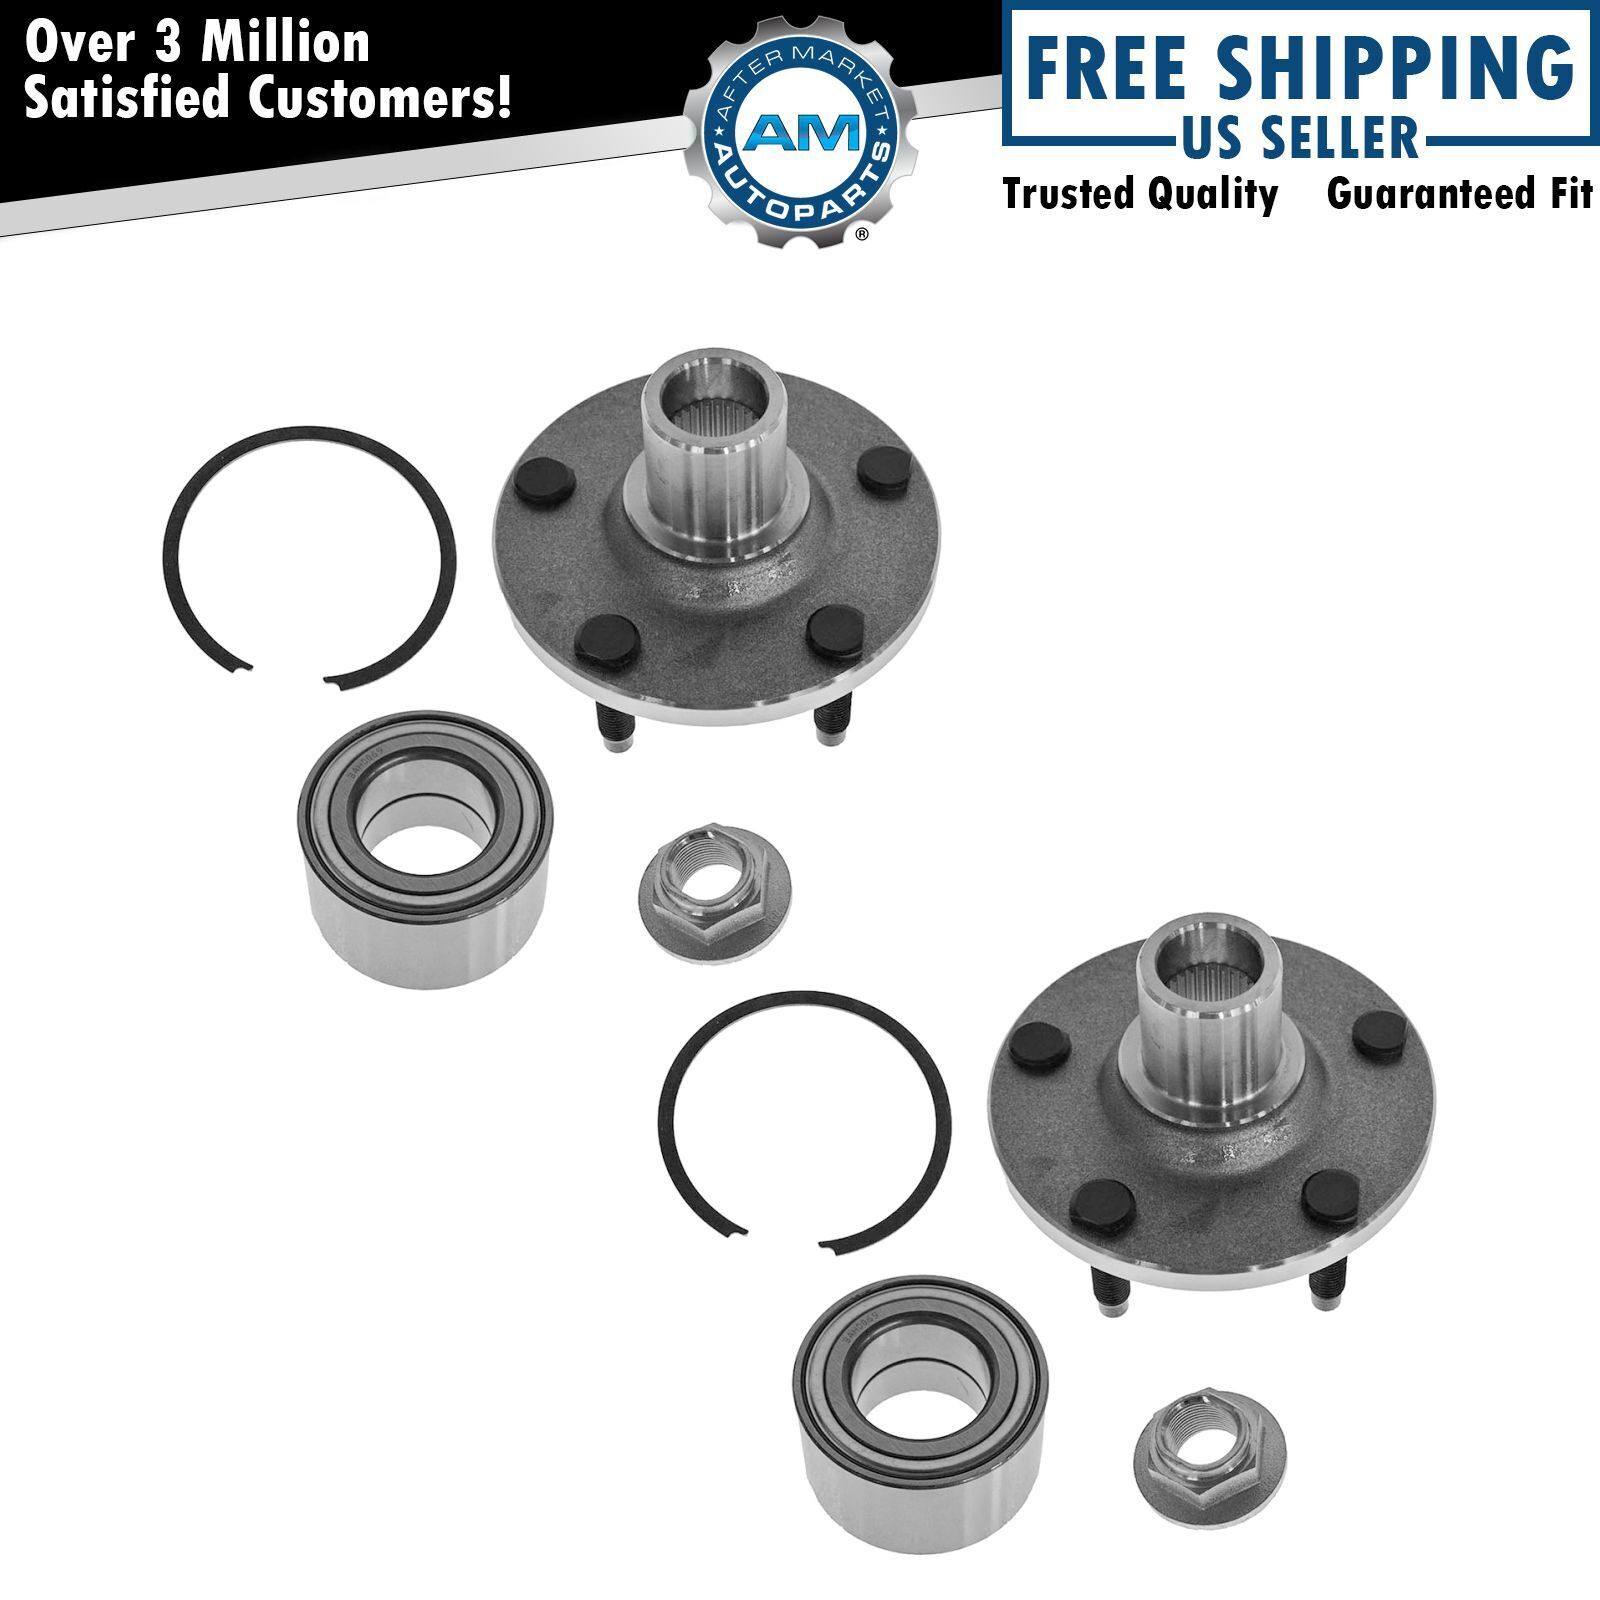 2 Front Wheel Bearing Hub Assemblys fits 01-12 Ford Escape Mazda Tribute